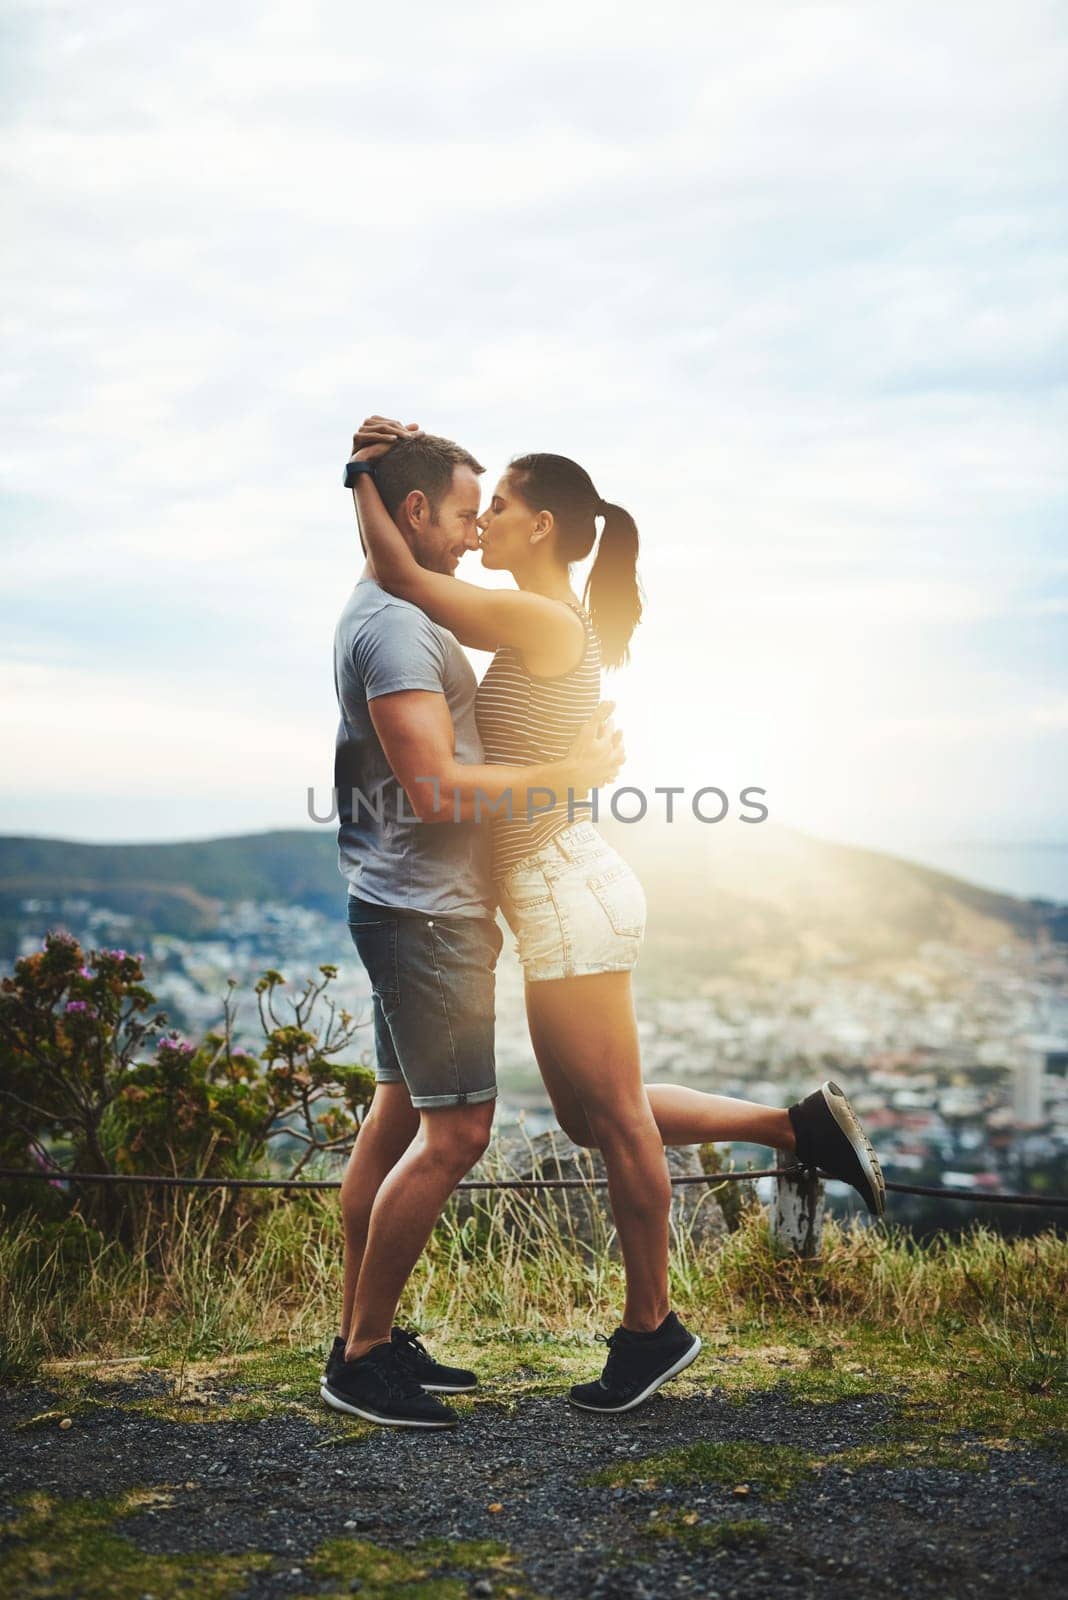 Cant beat that loving feeling. a young couple enjoying a romantic day outdoors. by YuriArcurs